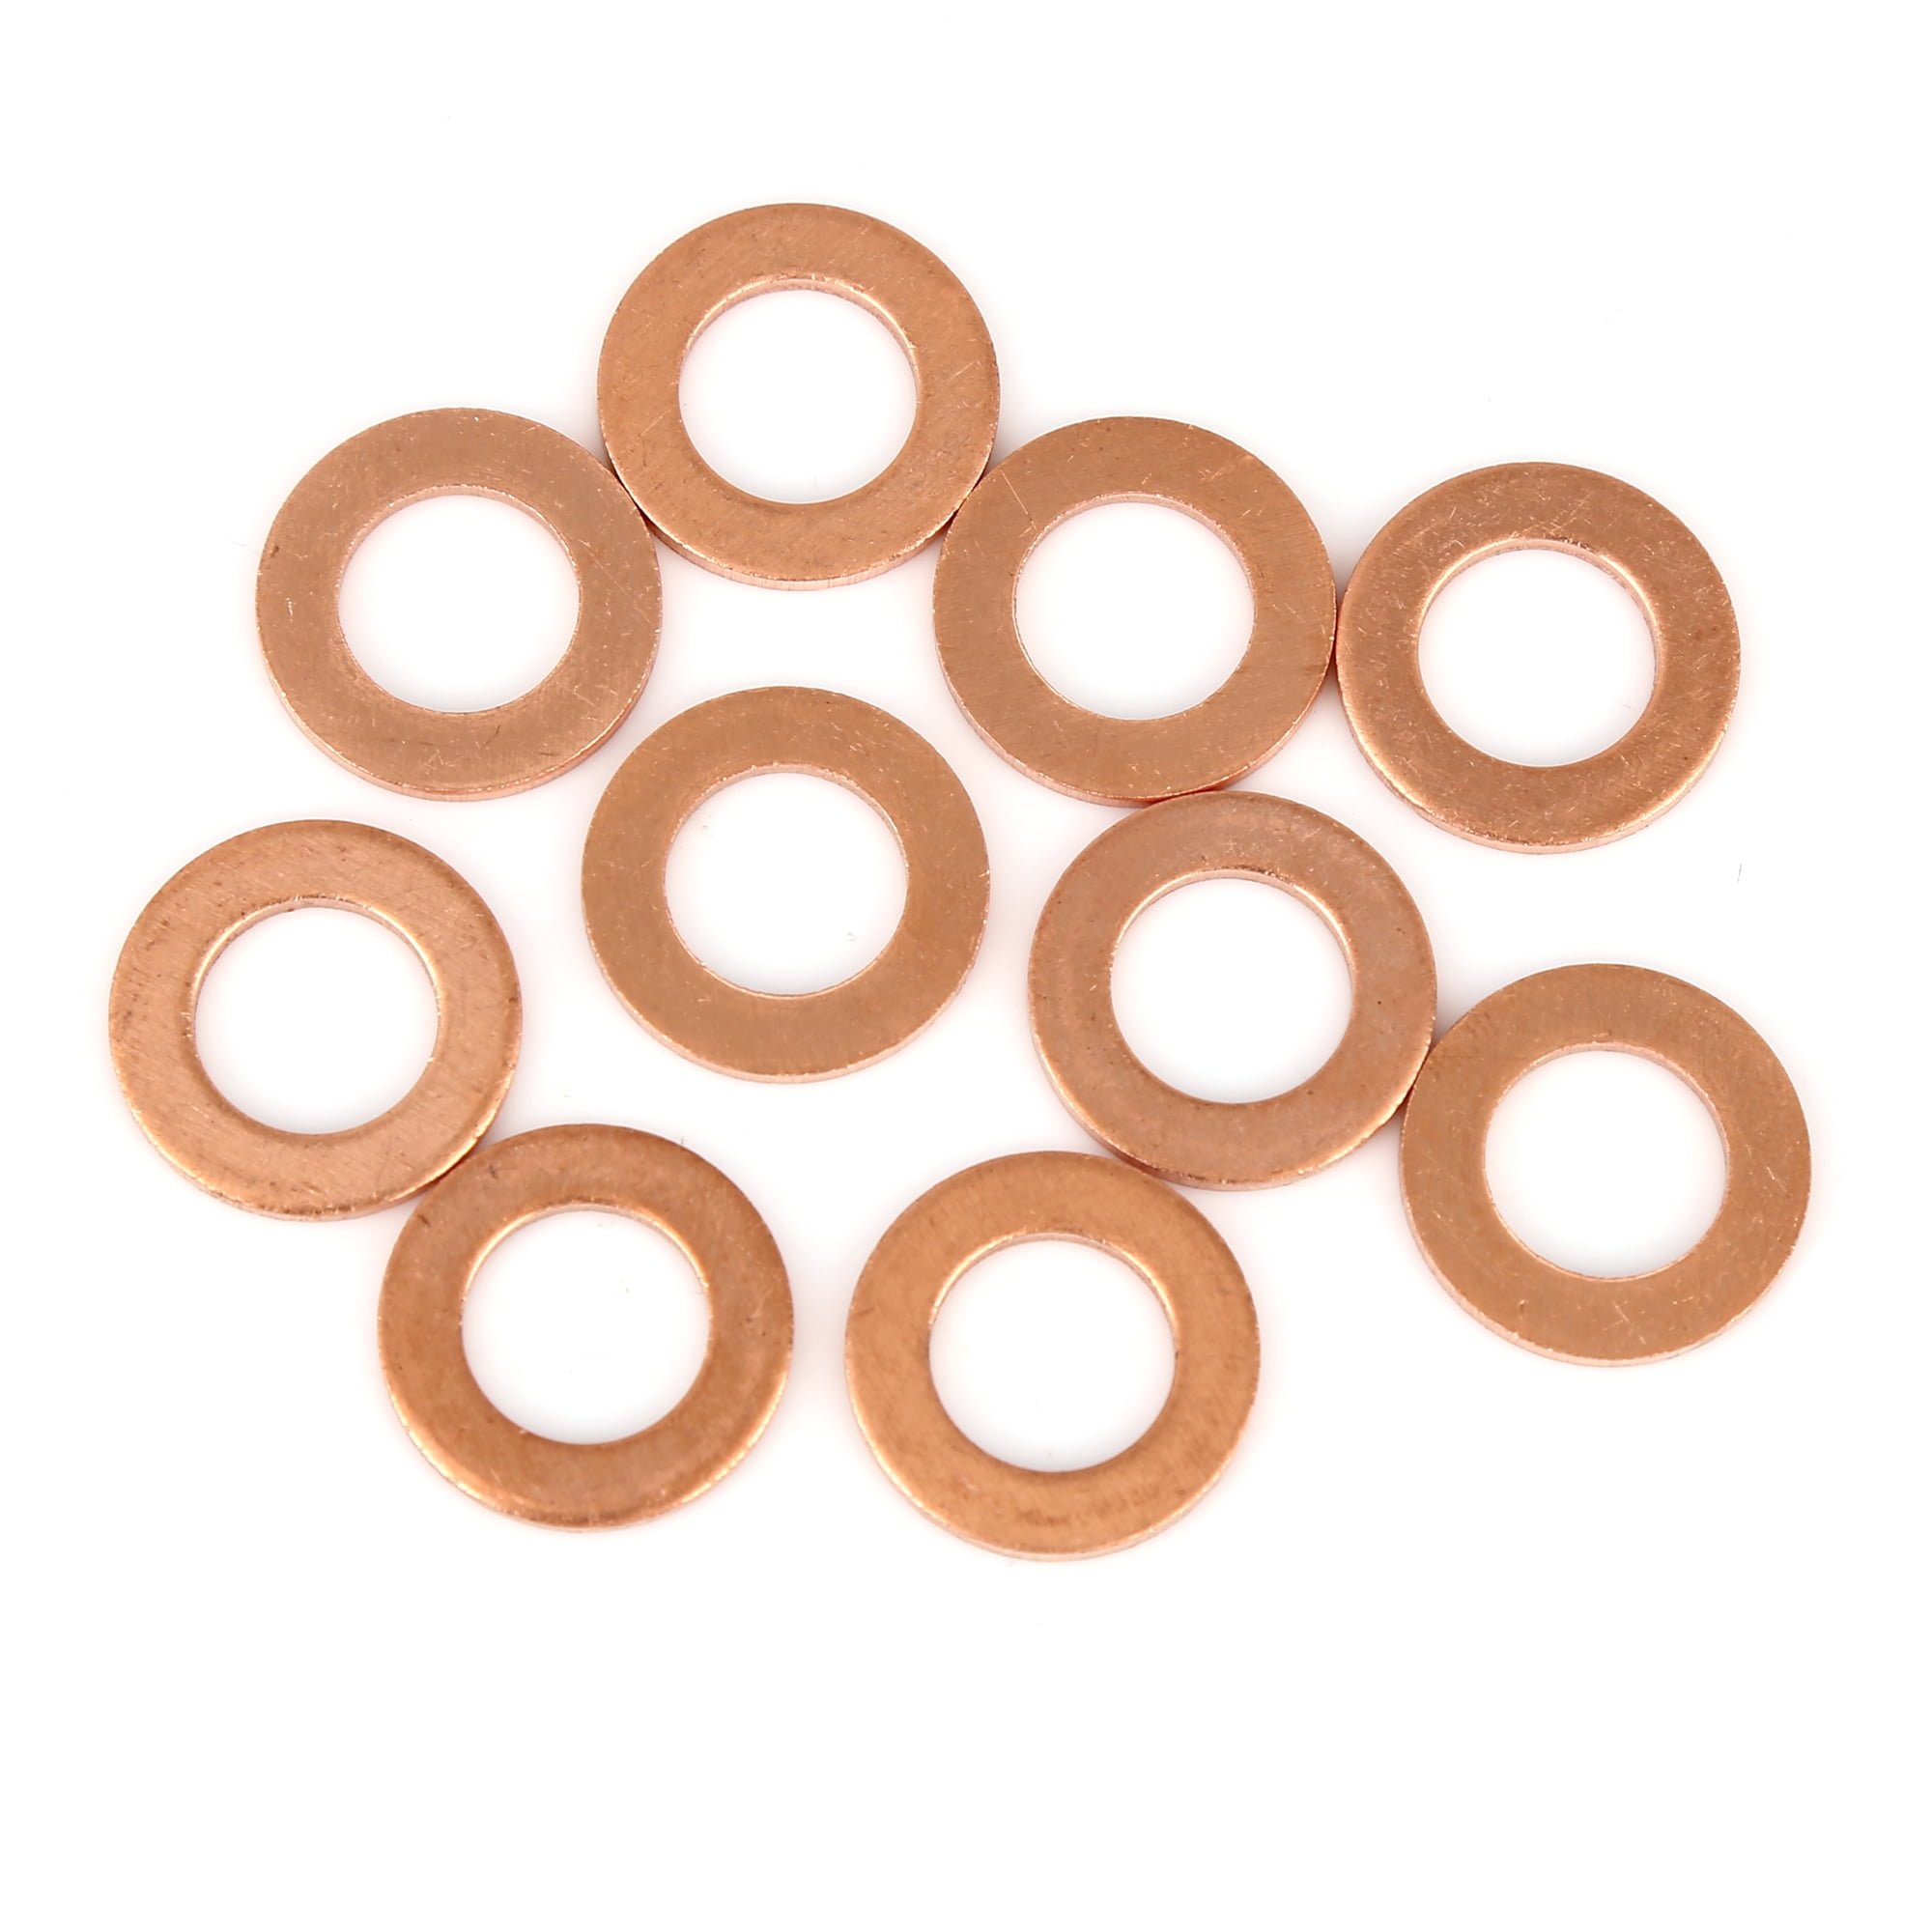 Pack of 10 Copper Washers 10mm x 18mm x 1.5mm 